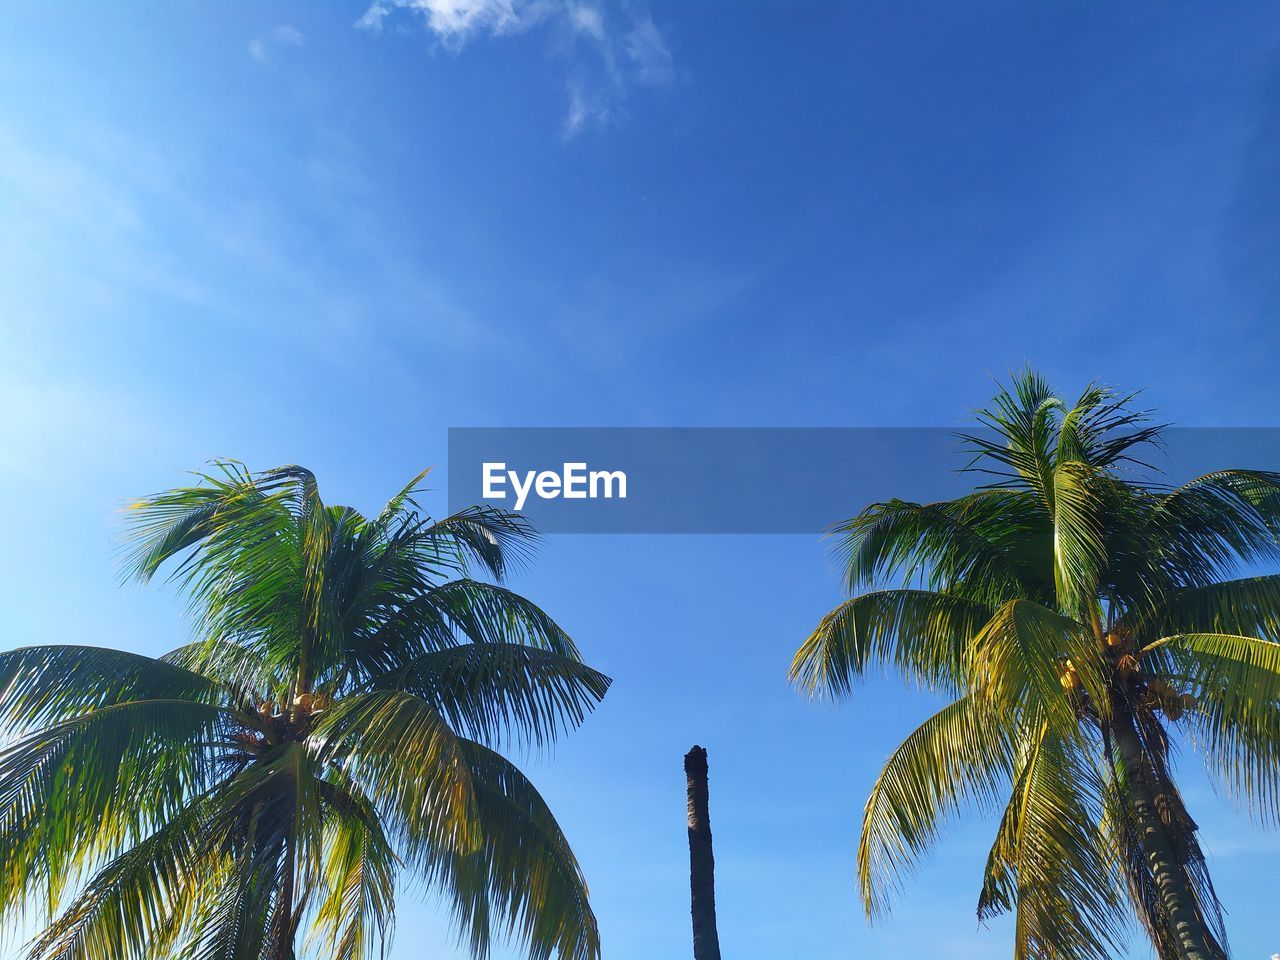 tropical climate, palm tree, tree, sky, plant, nature, blue, coconut palm tree, beauty in nature, cloud, tropical tree, tropics, low angle view, leaf, tranquility, scenics - nature, no people, land, outdoors, environment, travel destinations, sea, palm leaf, sunlight, travel, idyllic, sunny, growth, day, vacation, borassus flabellifer, wind, trip, water, tranquil scene, beach, ocean, holiday, clear sky, summer, flower, tree trunk, green, tourism, copy space, island, trunk